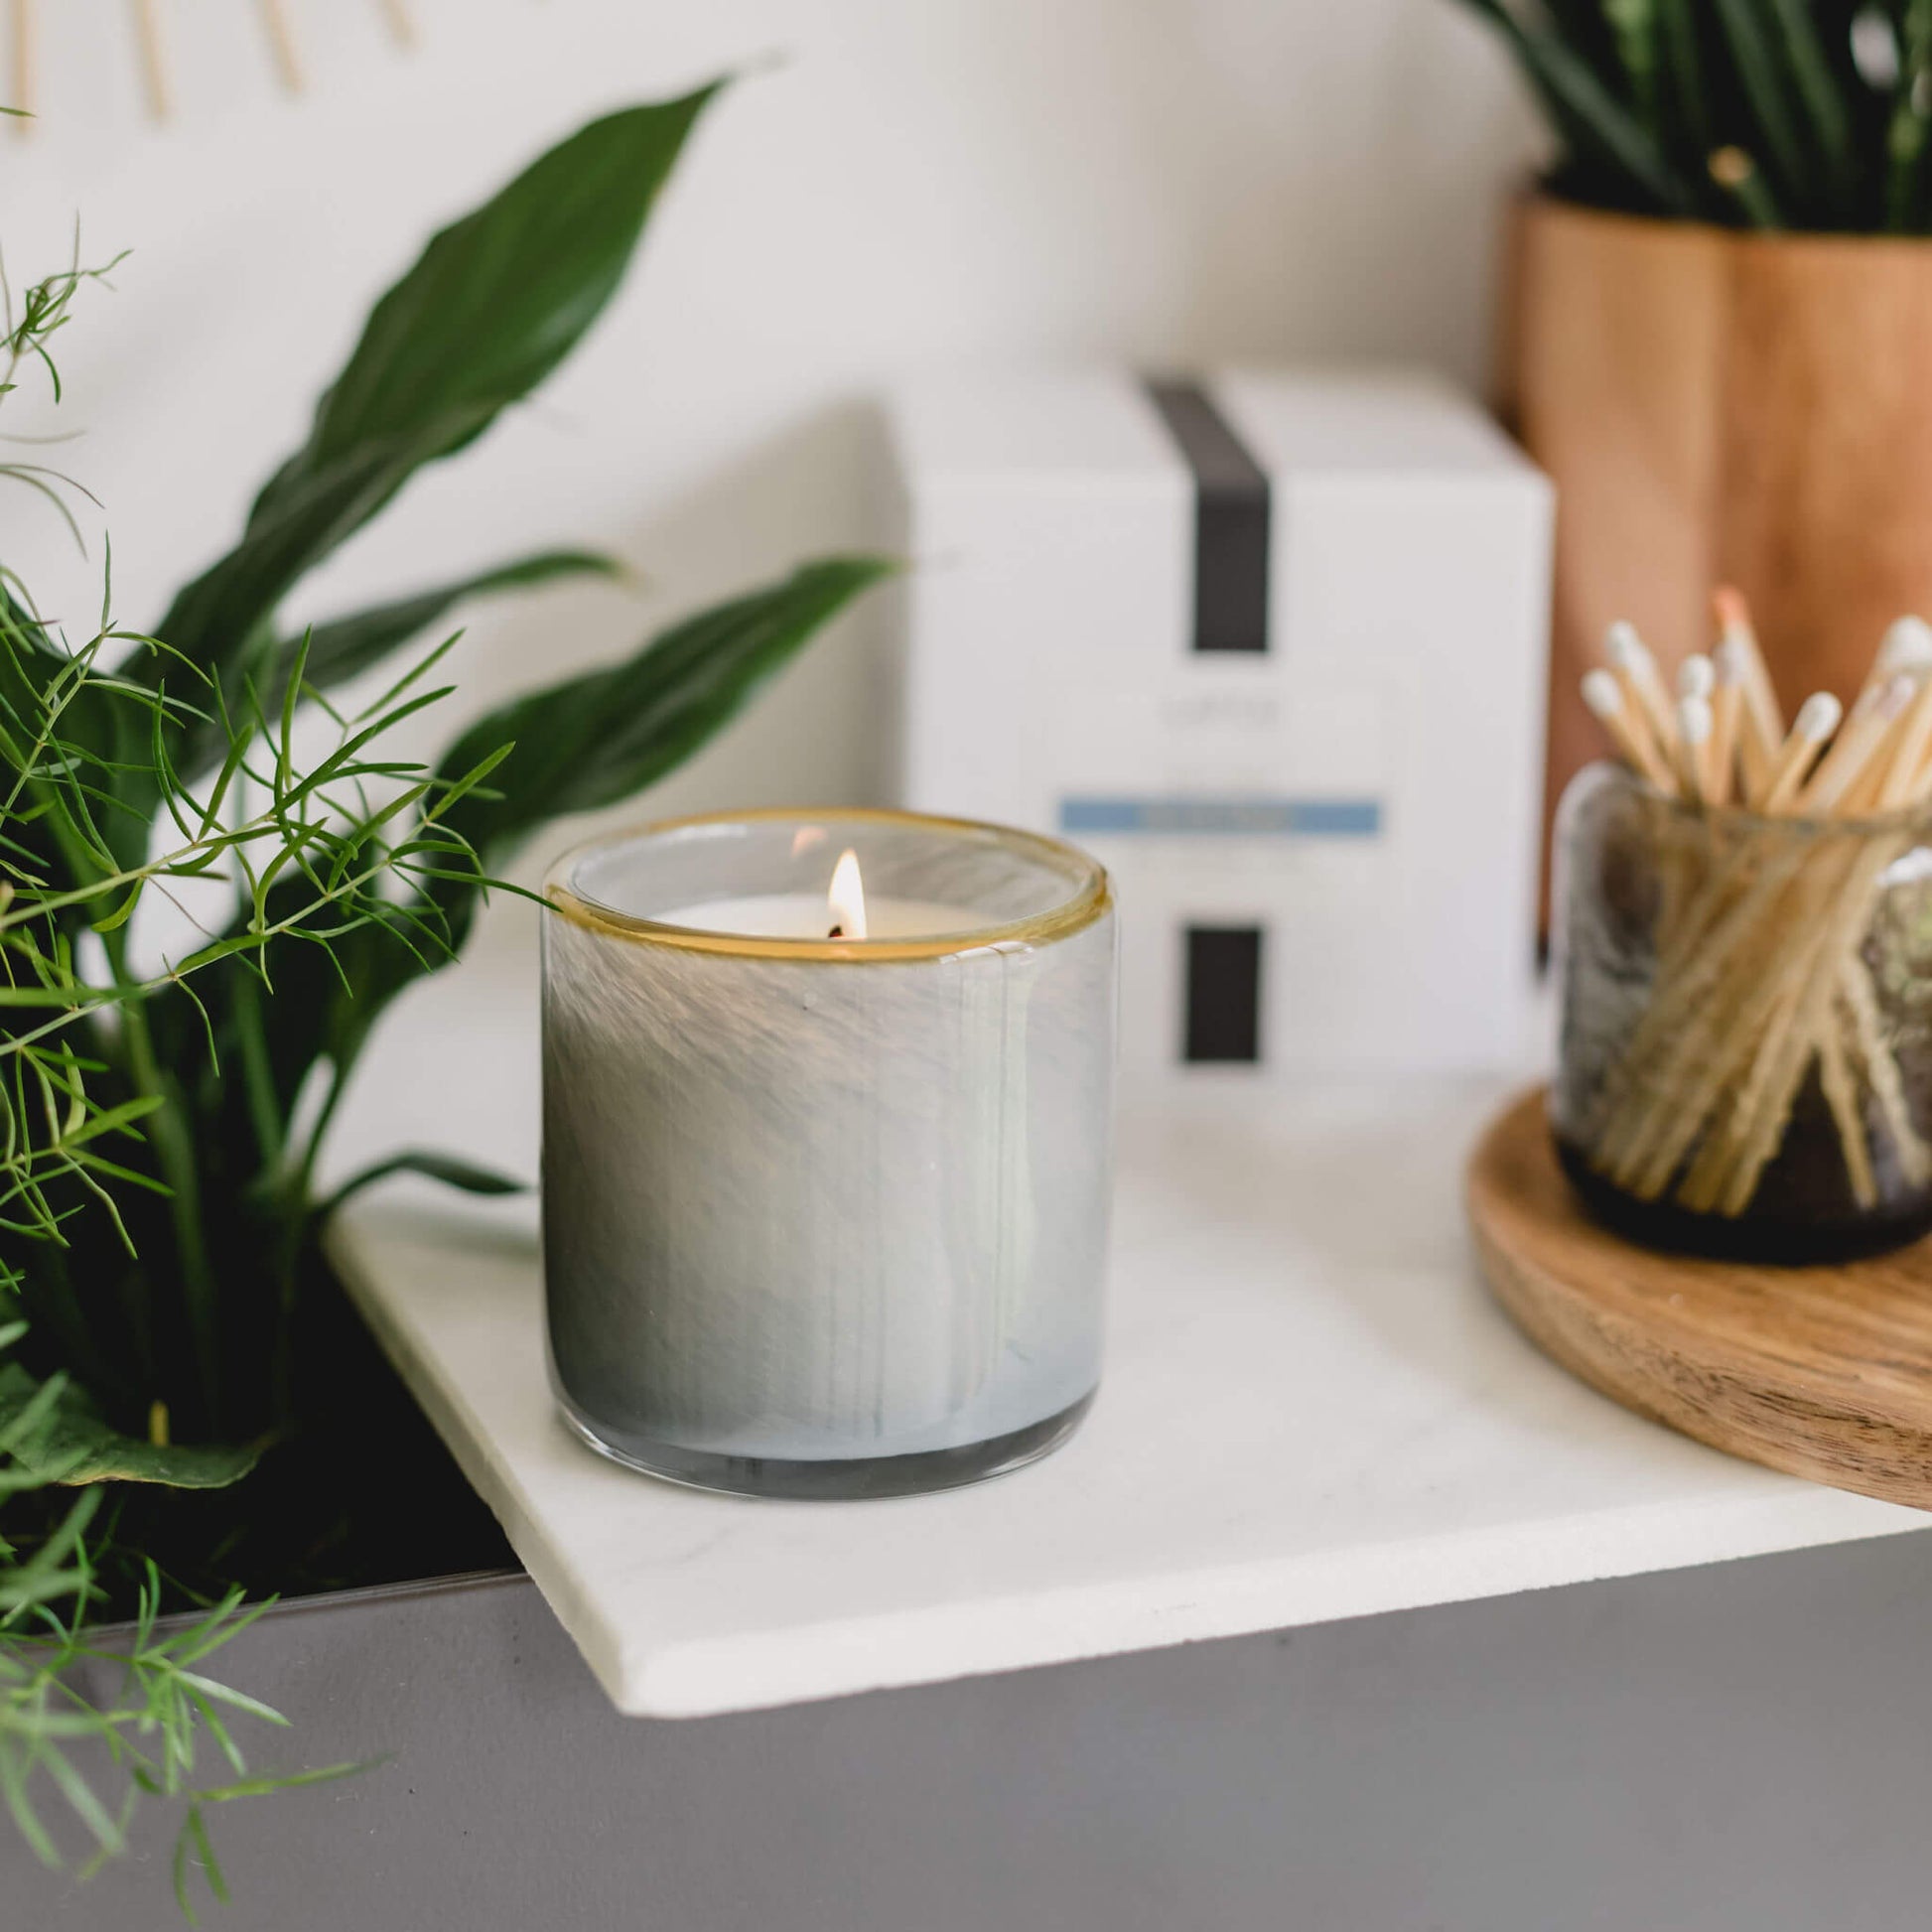 Sea & Dune Candle by LAFCO